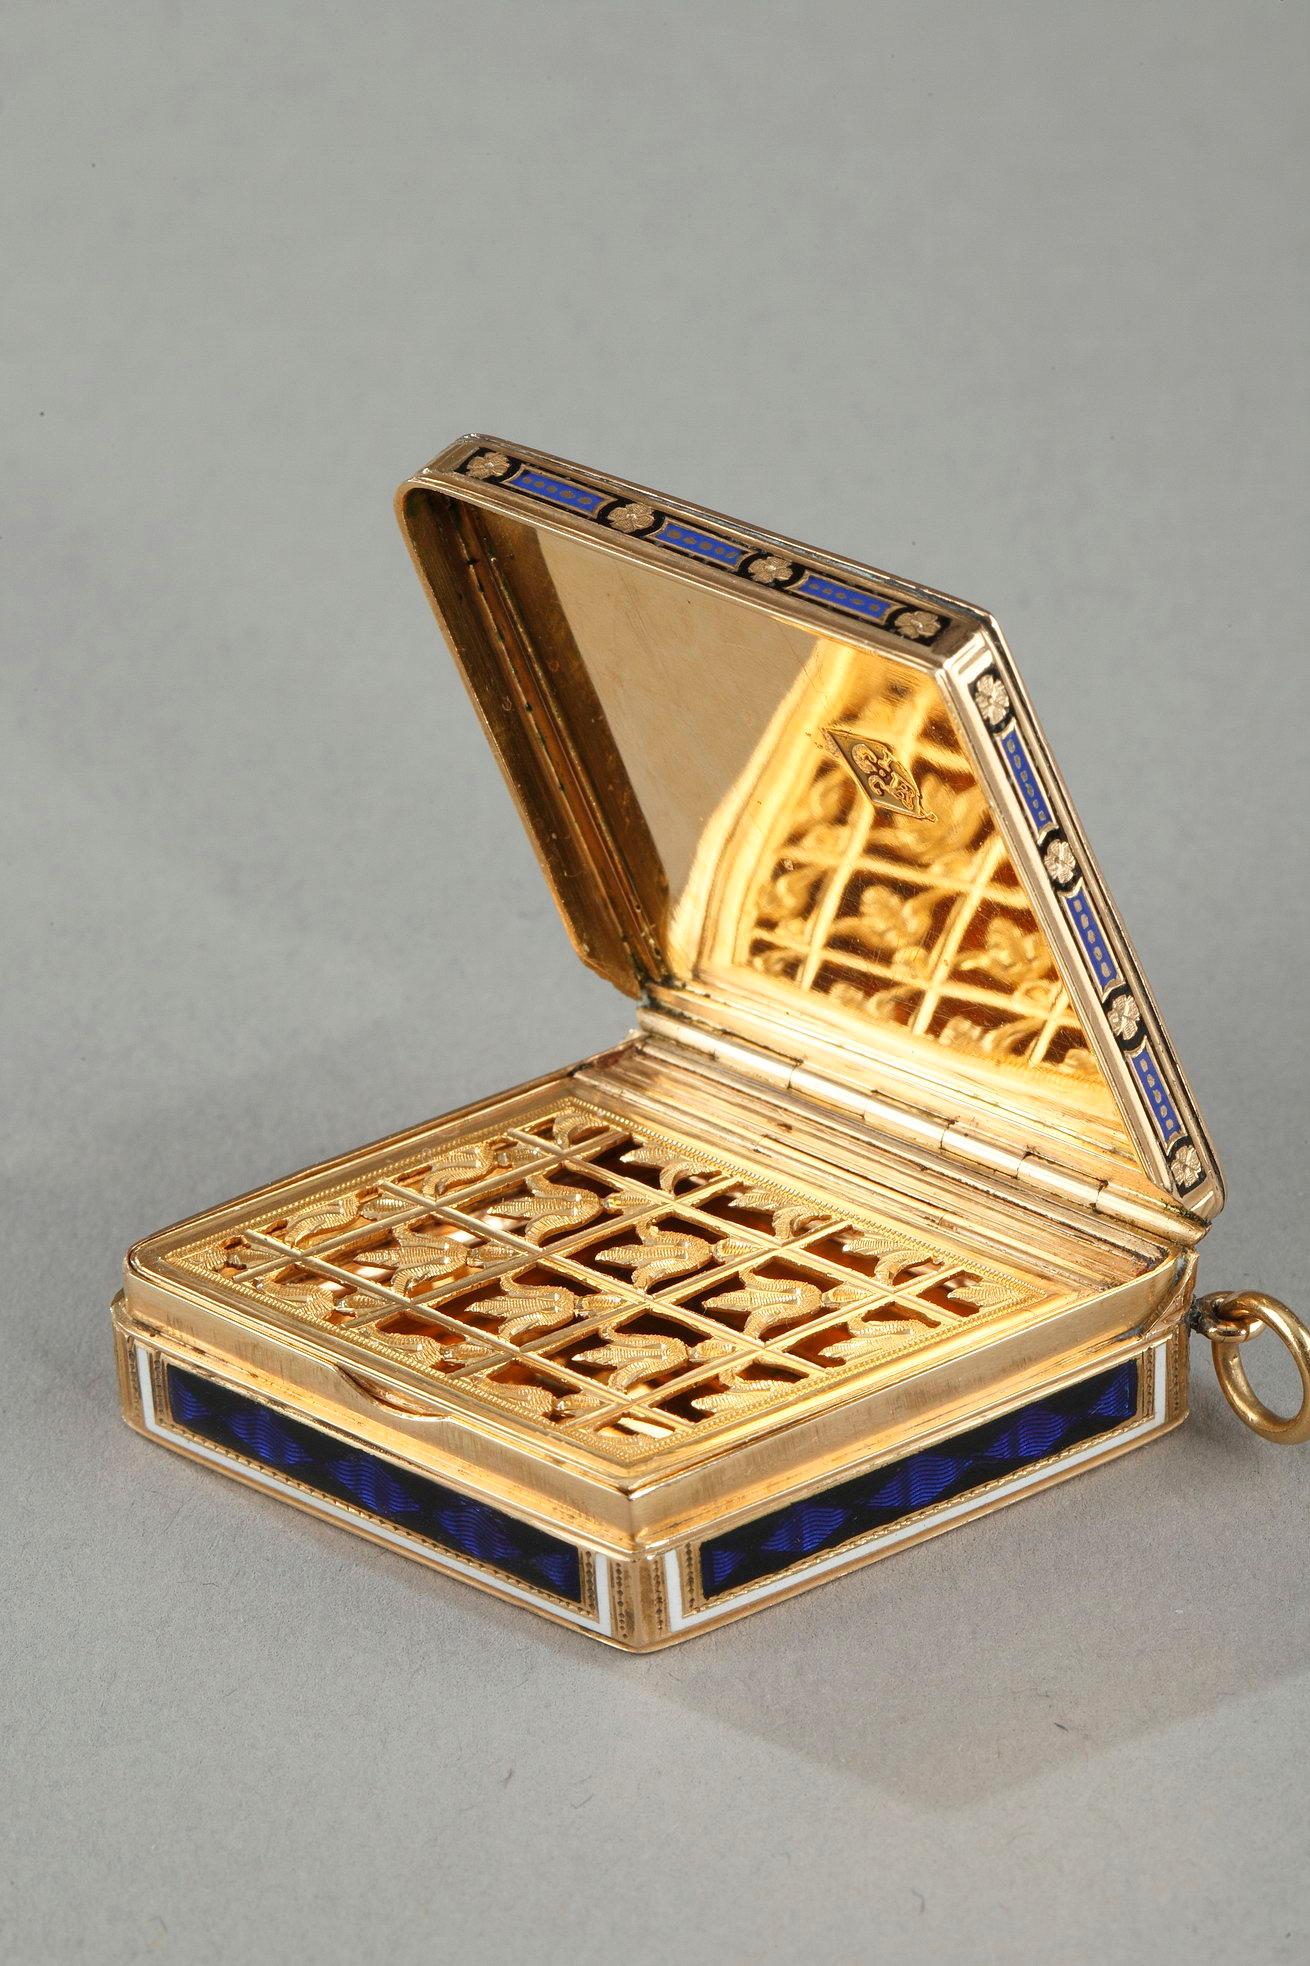 Gold Vinaigrette with Pearls and Enamel, Late 18th Century Swiss Work For Sale 2